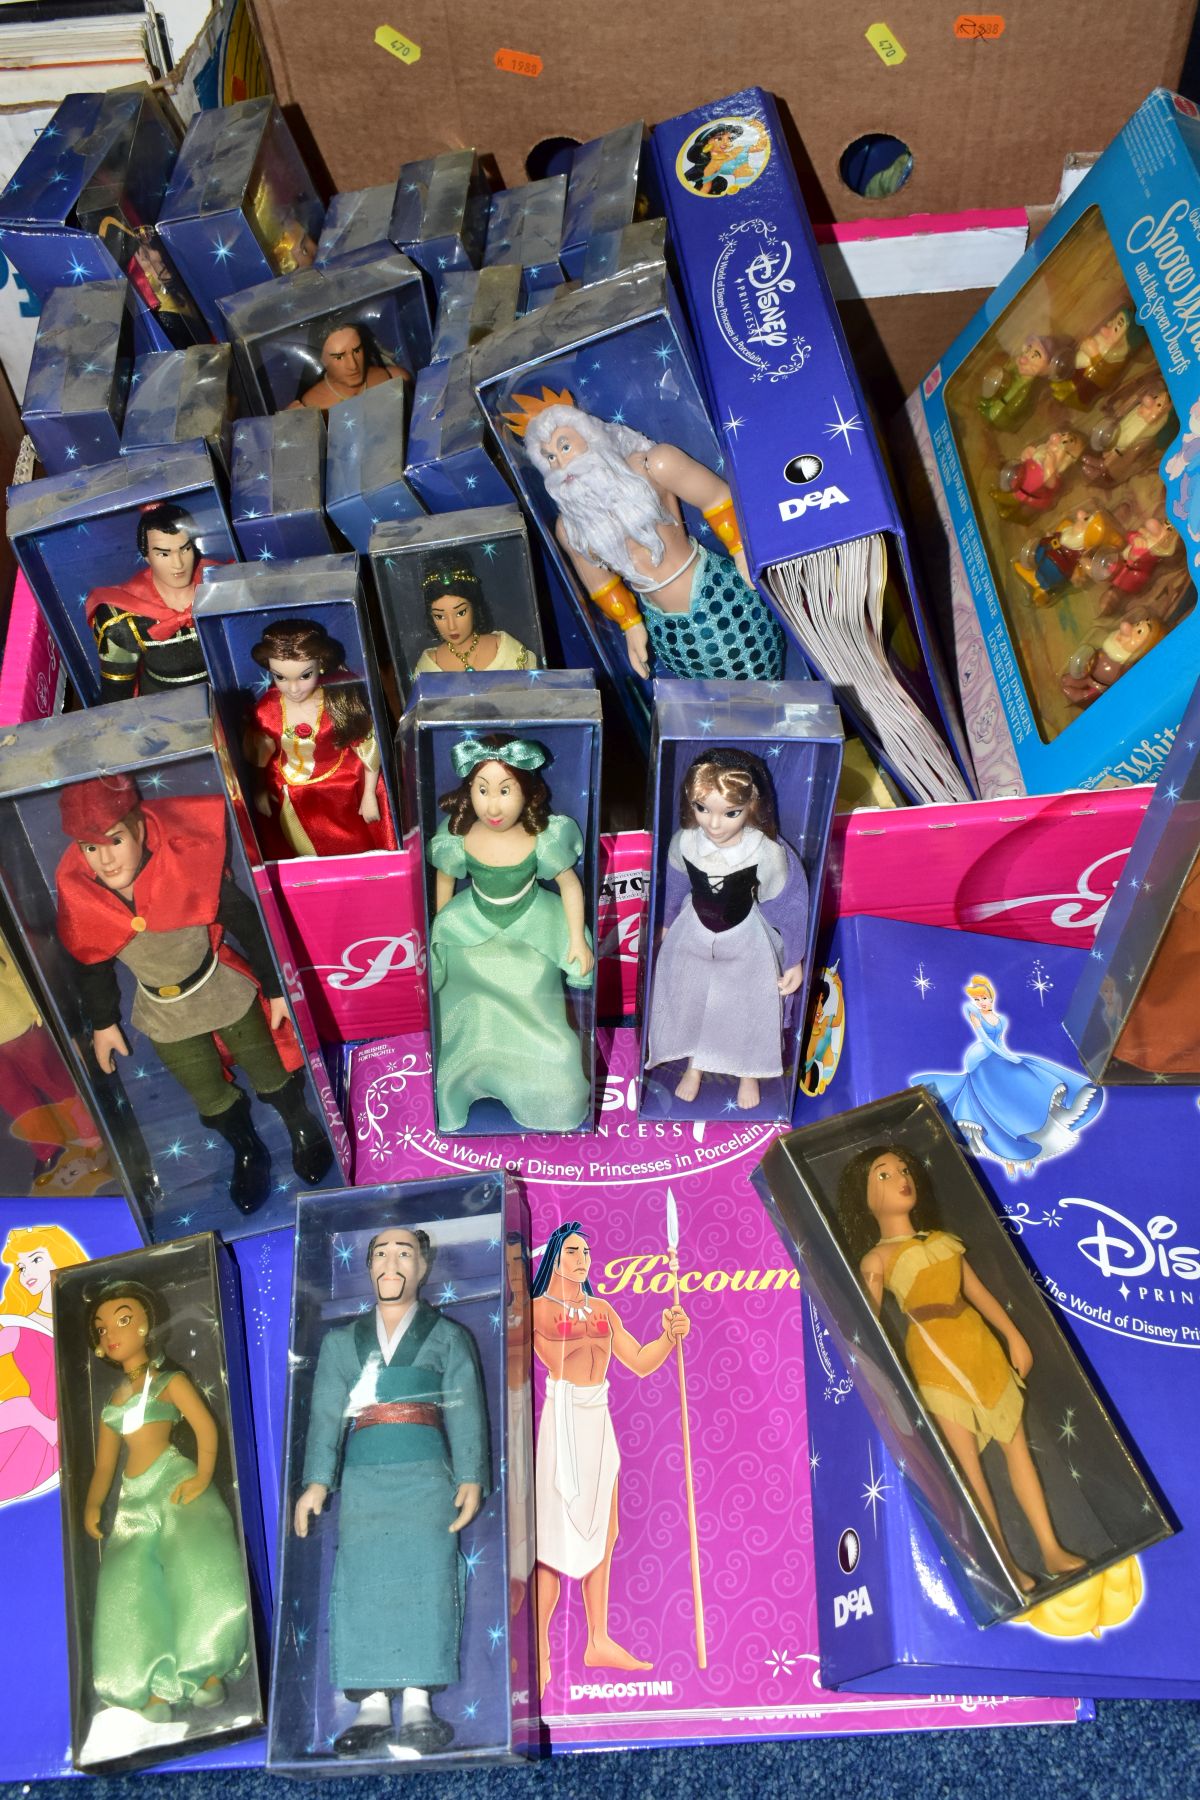 A COMPLETE SET OF THE DEAGOSTINI DISNEY PRINCESS PORCELAIN DOLL COLLECTION, dating from 2004